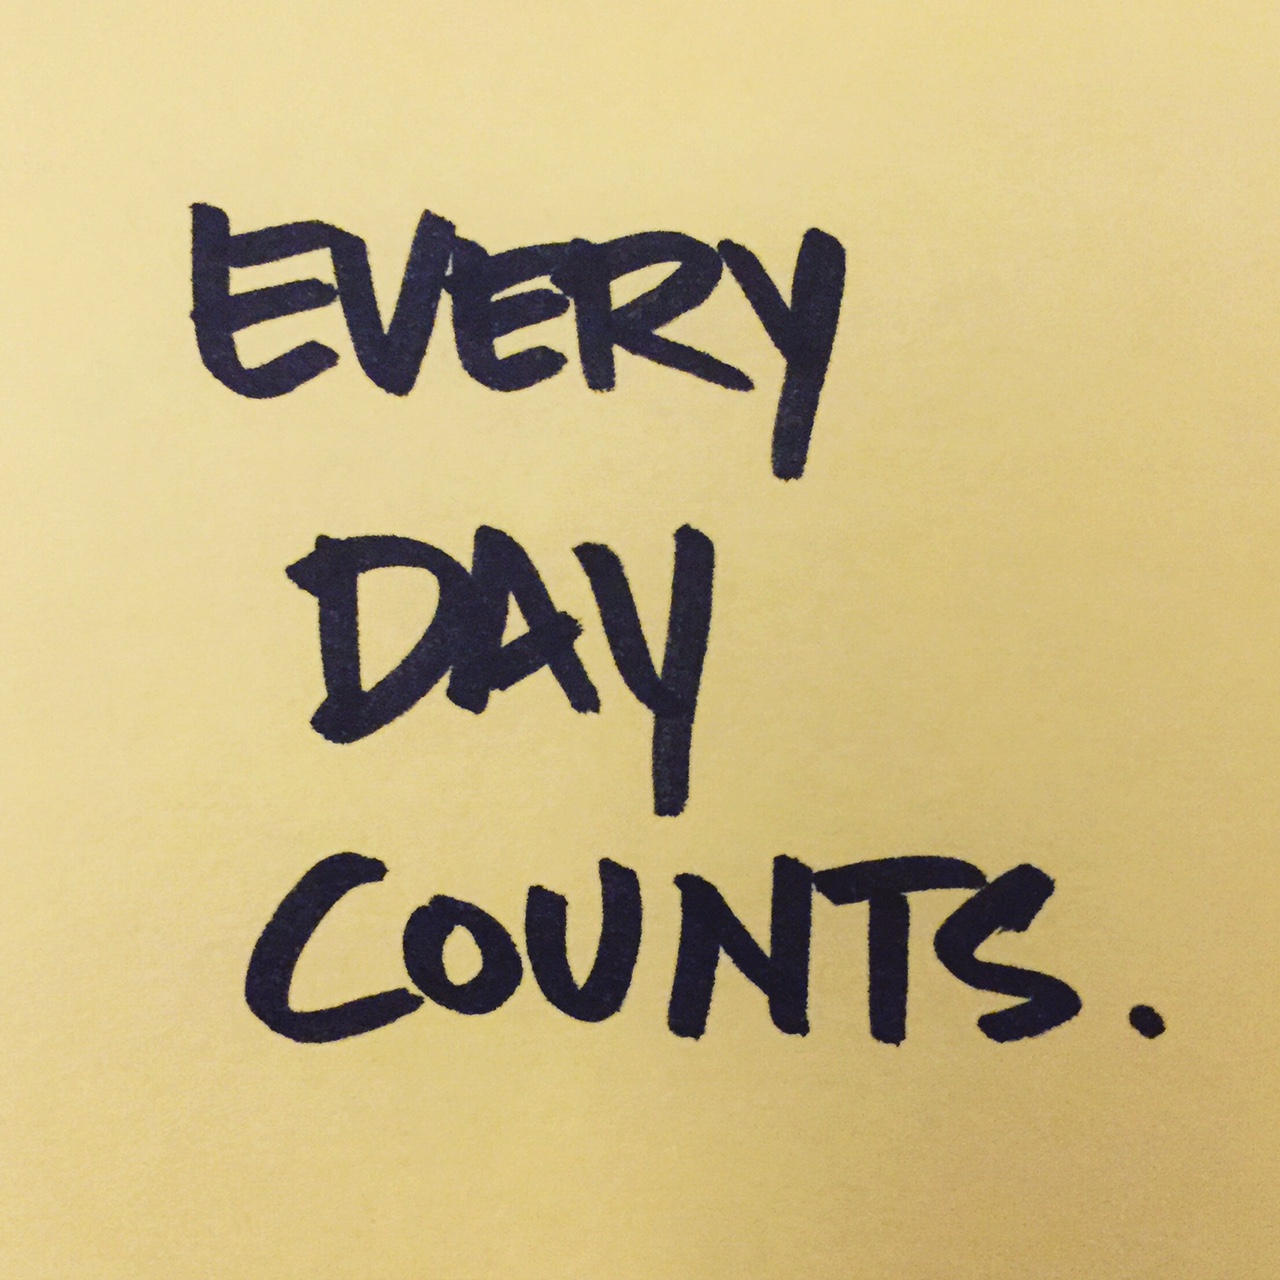 Every day counts.